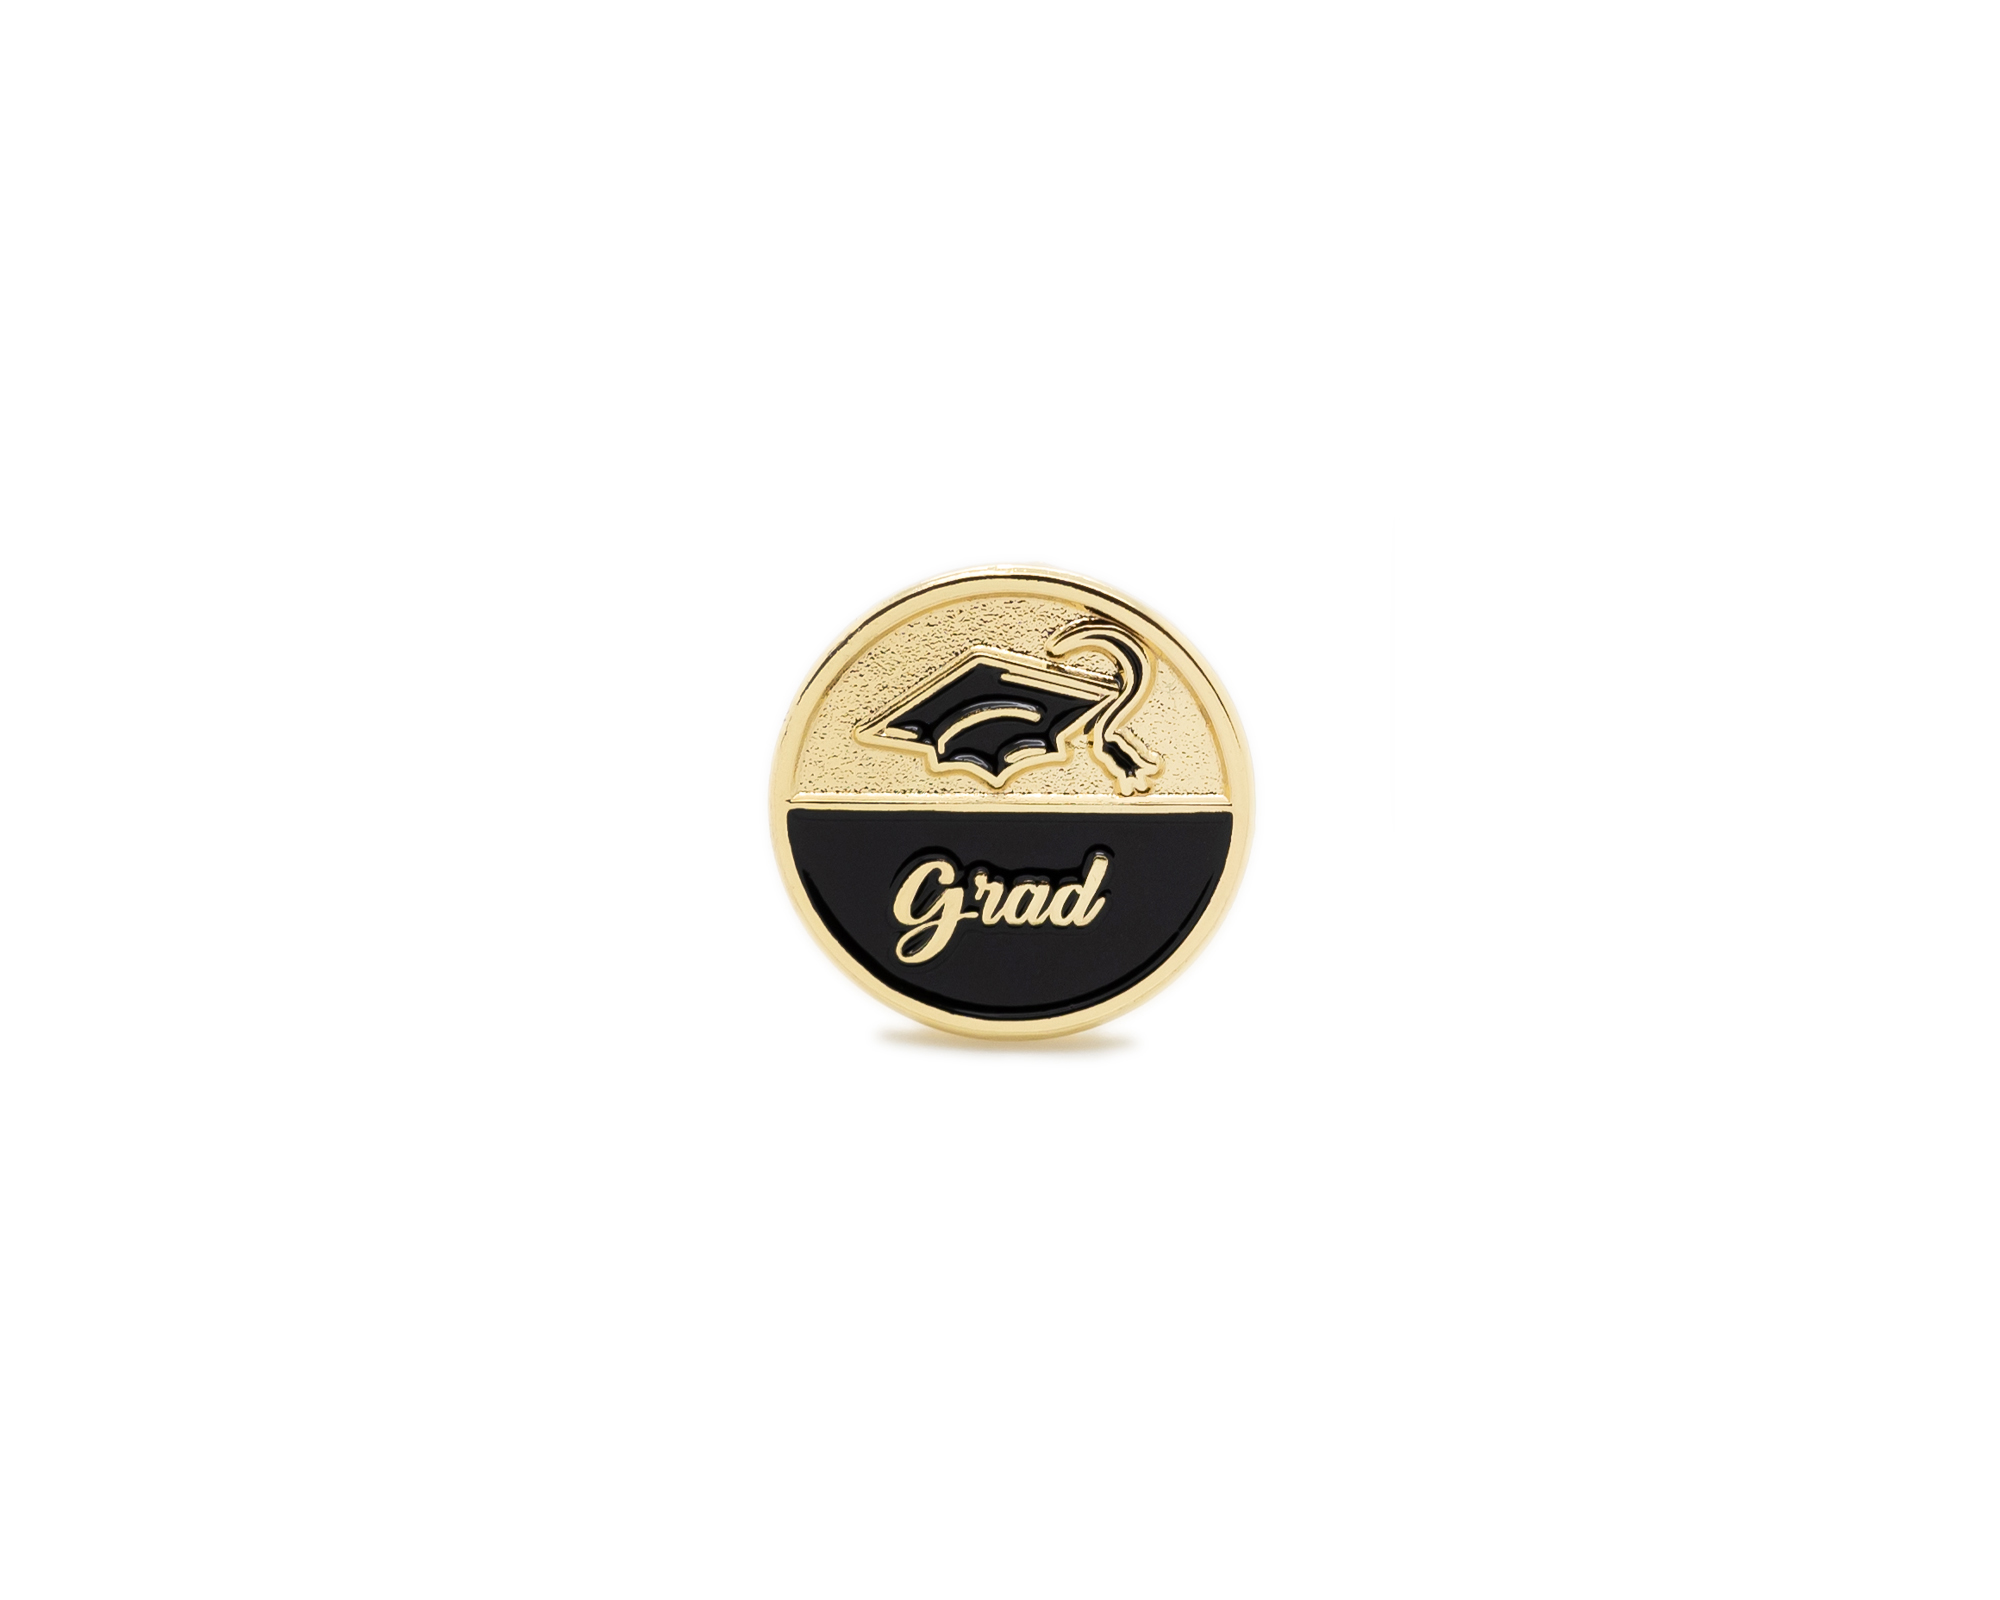 Grad Script Pin with contrasting black enamel detail. "Grad" is embossed in script lettering, with a black enamel grad cap at the top. 